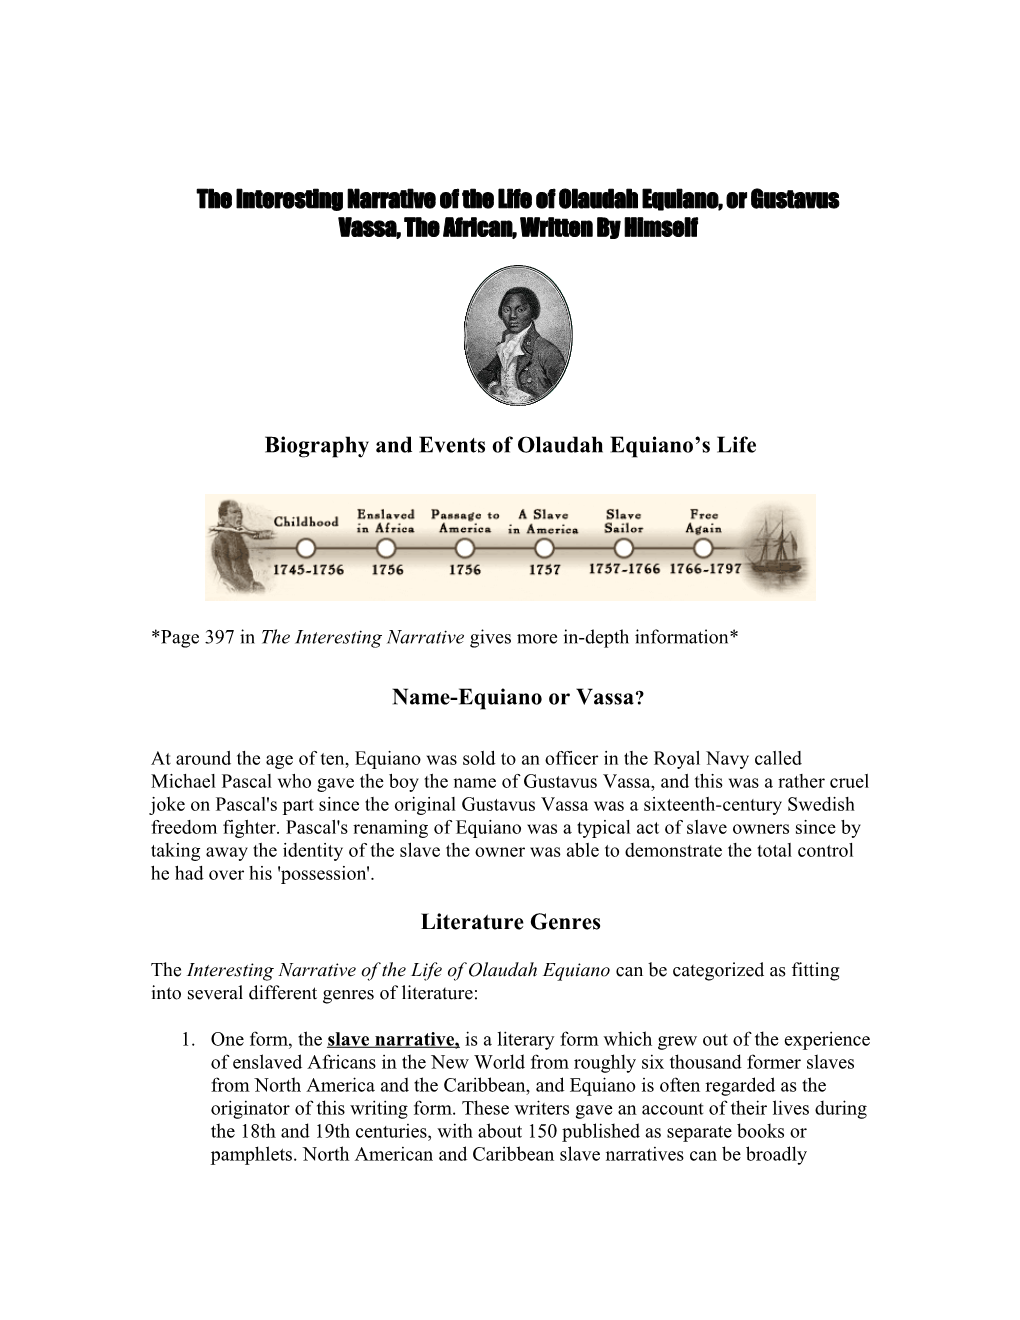 The Interesting Narrative of the Life of Olaudah Equiano, Or Gustavus Vassa, the African